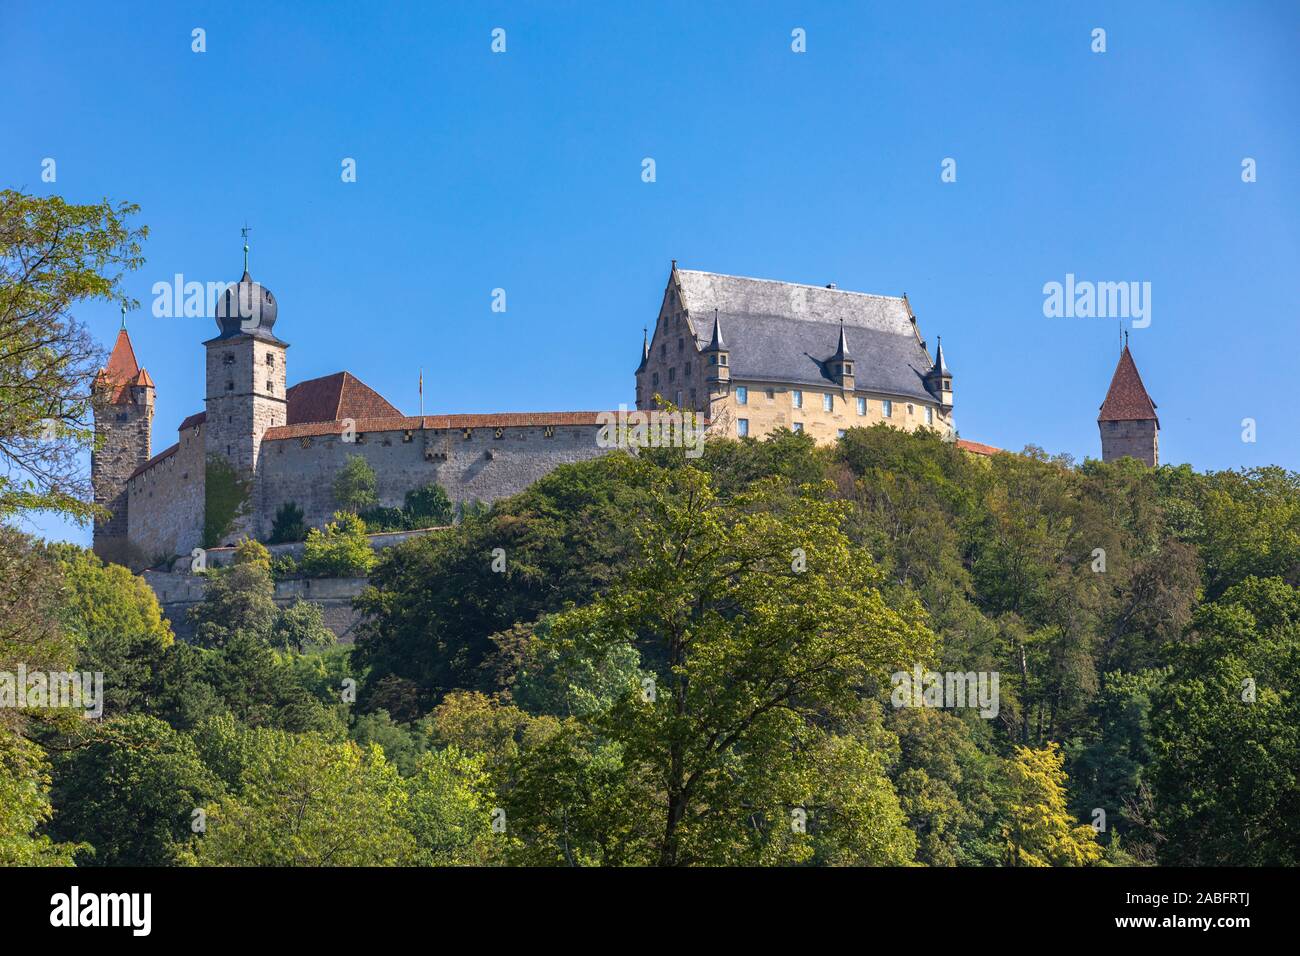 Exterior view of the Veste Coburg (Coburg Fortress) on a sunny day in Coburg, Bavaria, Germany Stock Photo